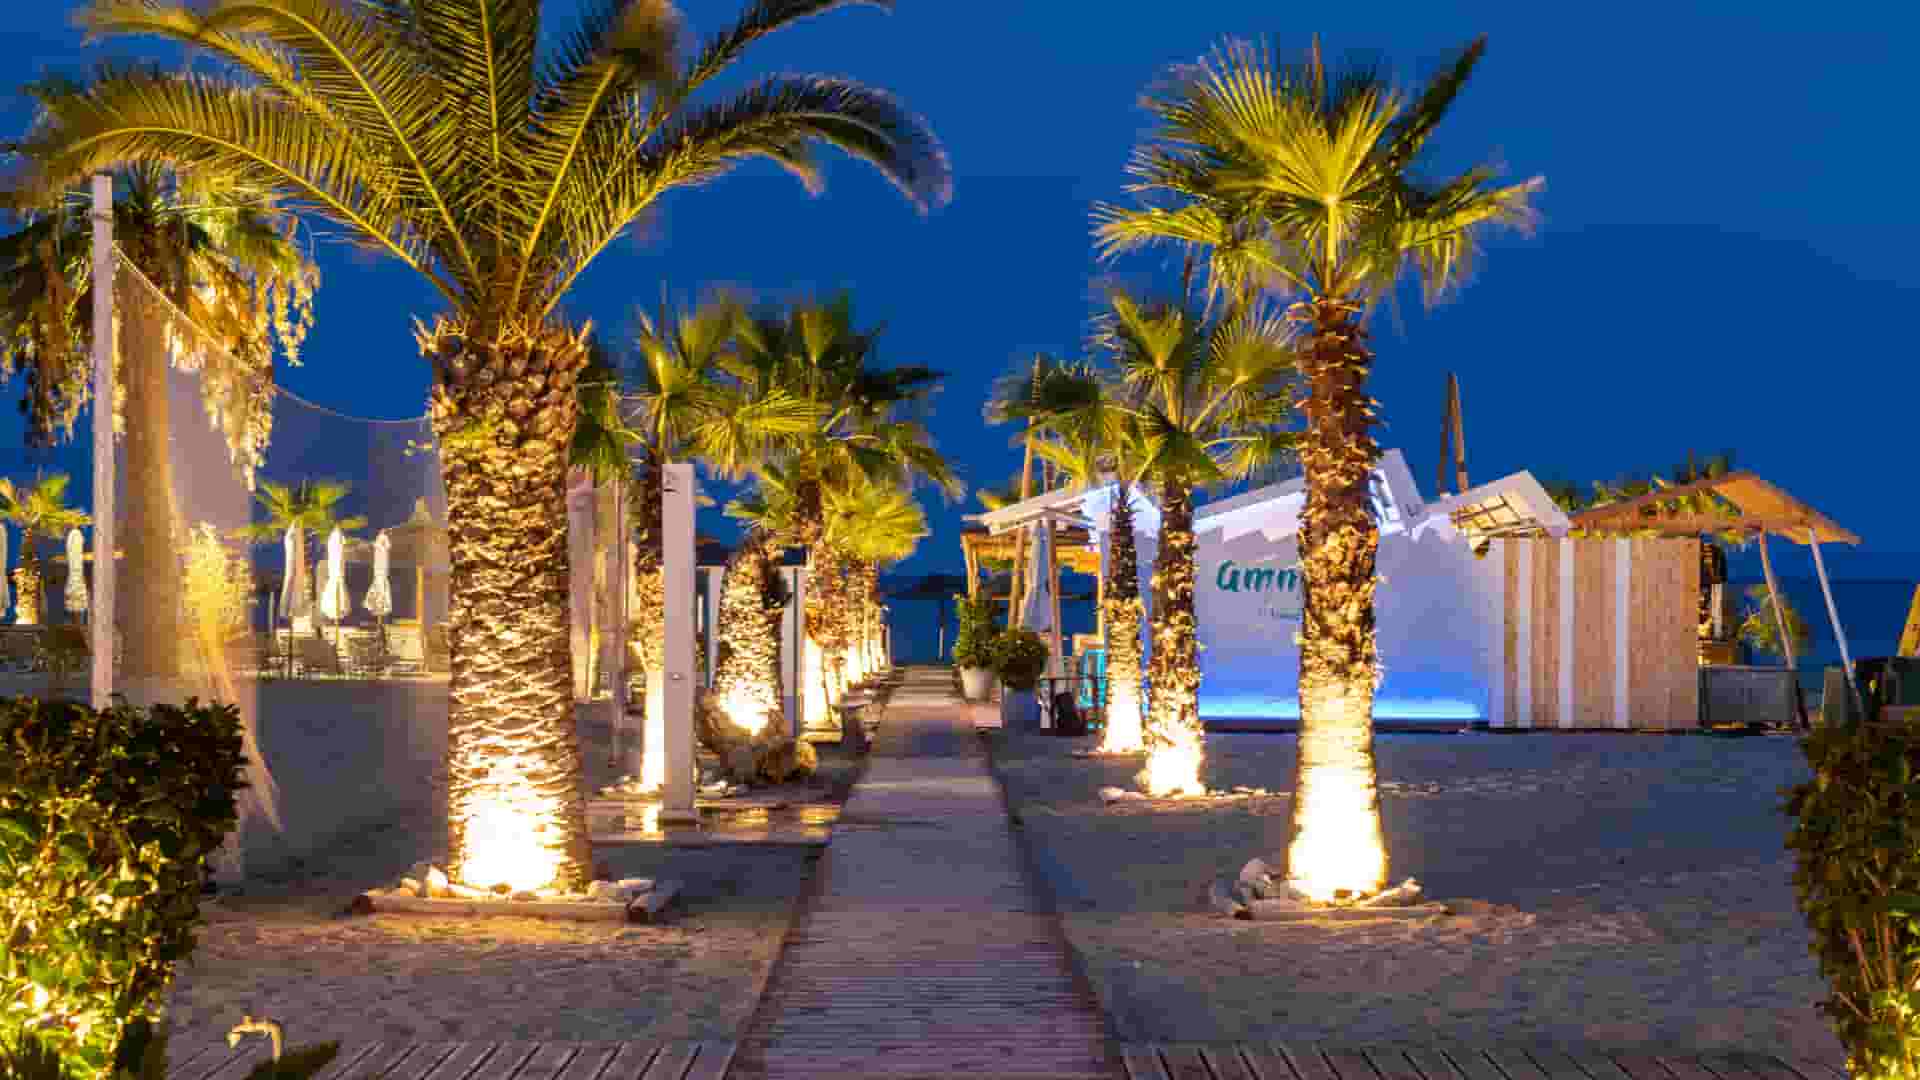 a walkway with palm trees and a building in the background